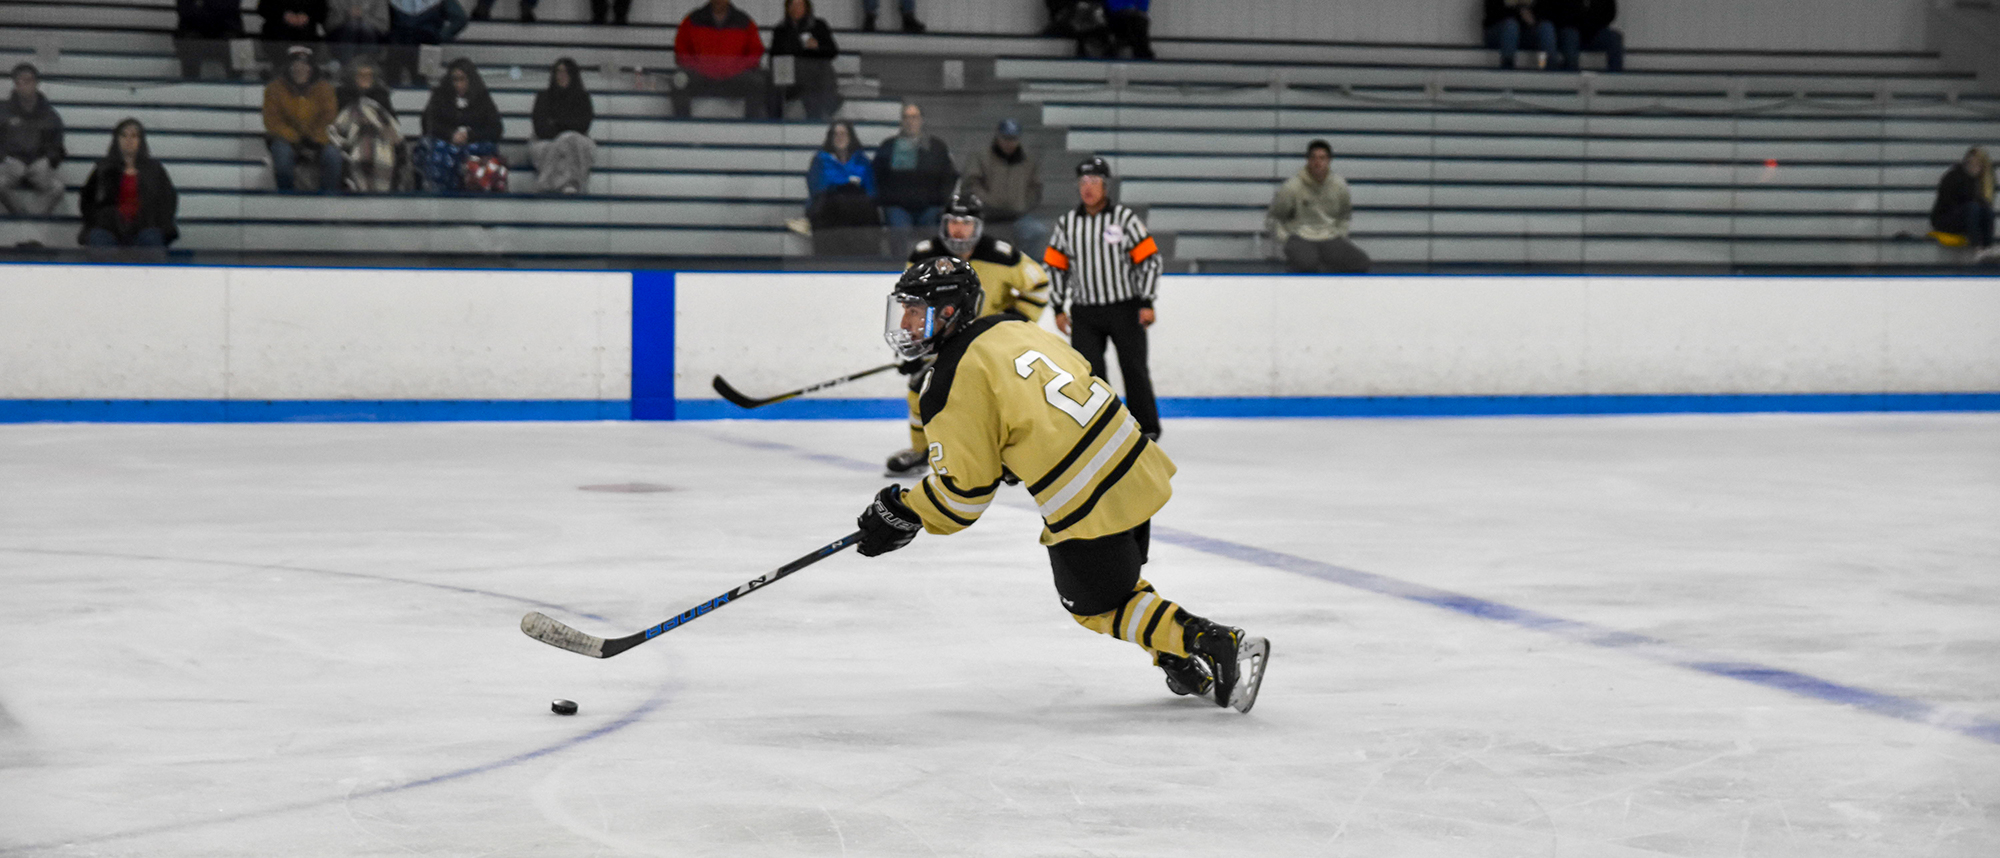 HOCKEY TAKES OVERTIME WIN AGAINST BOSTON COLLEGE